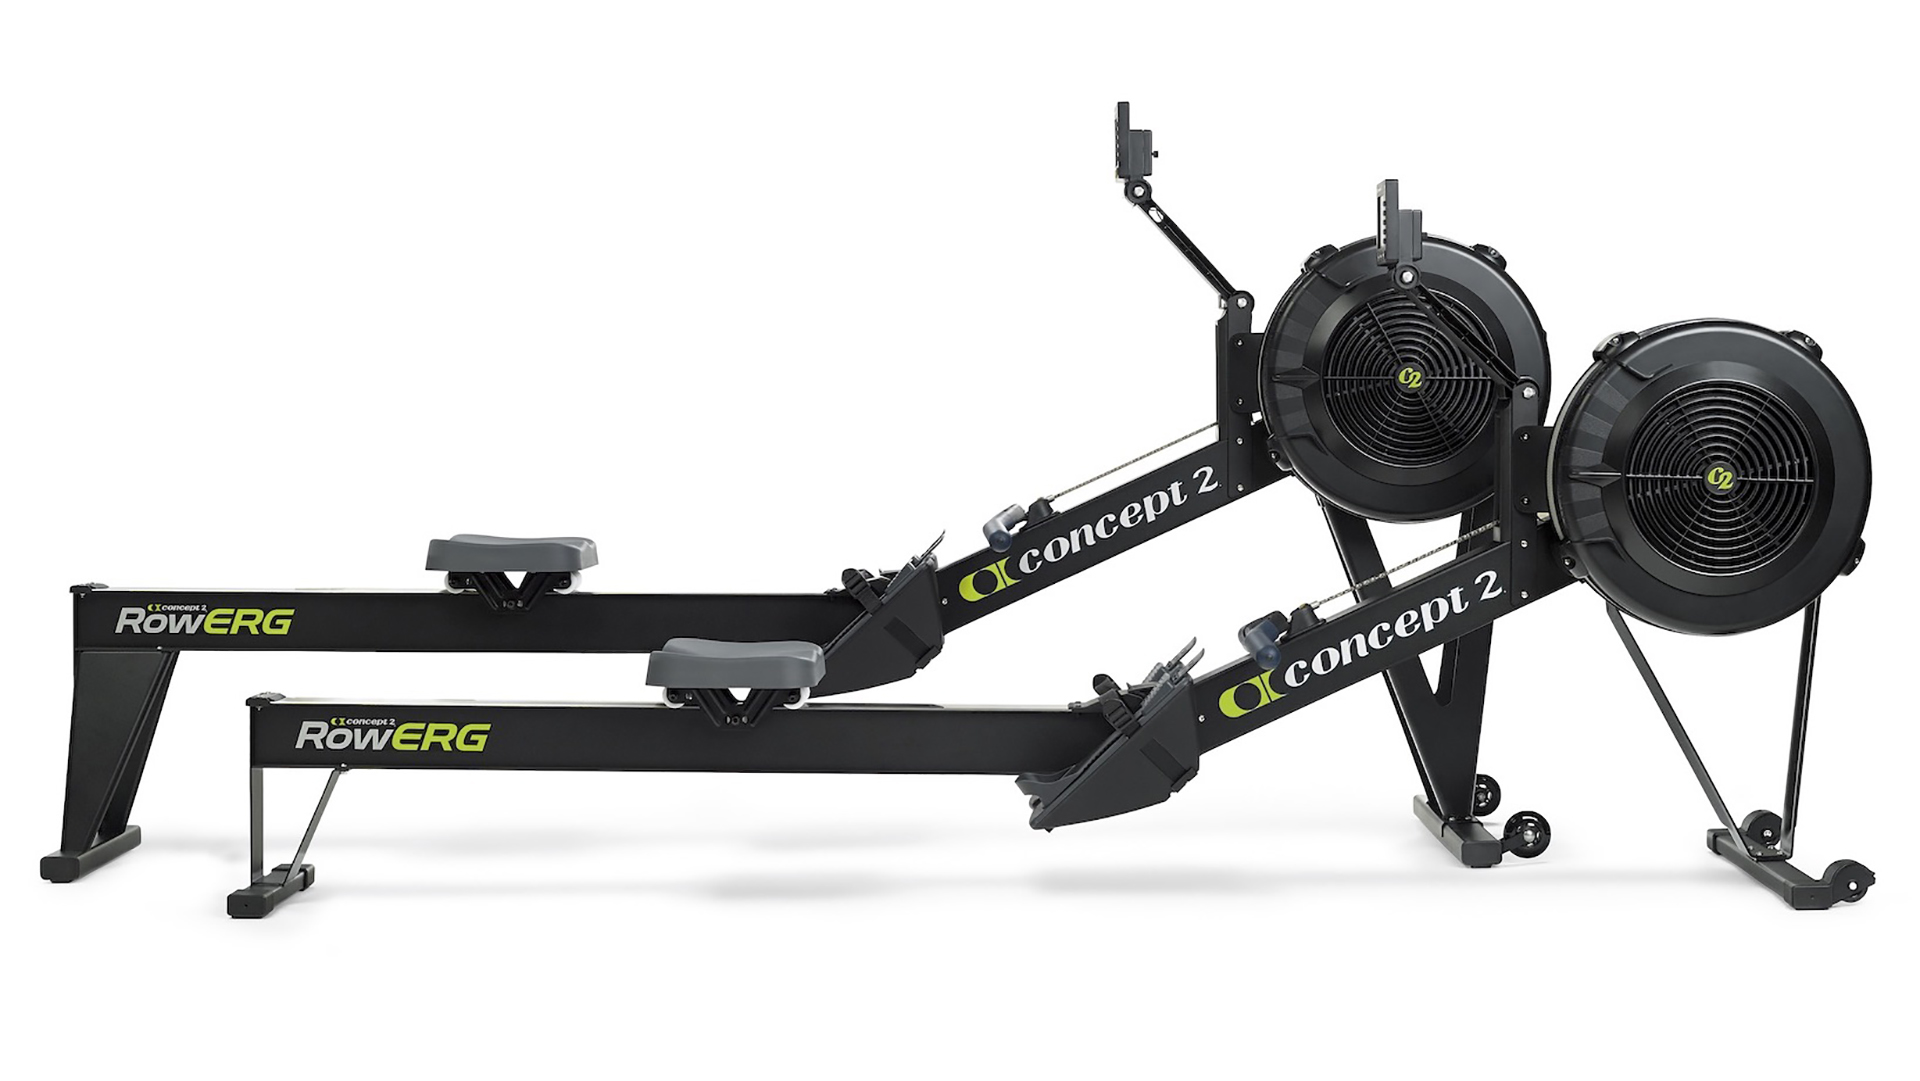 Rowing machine on sale: Product image of Concept2